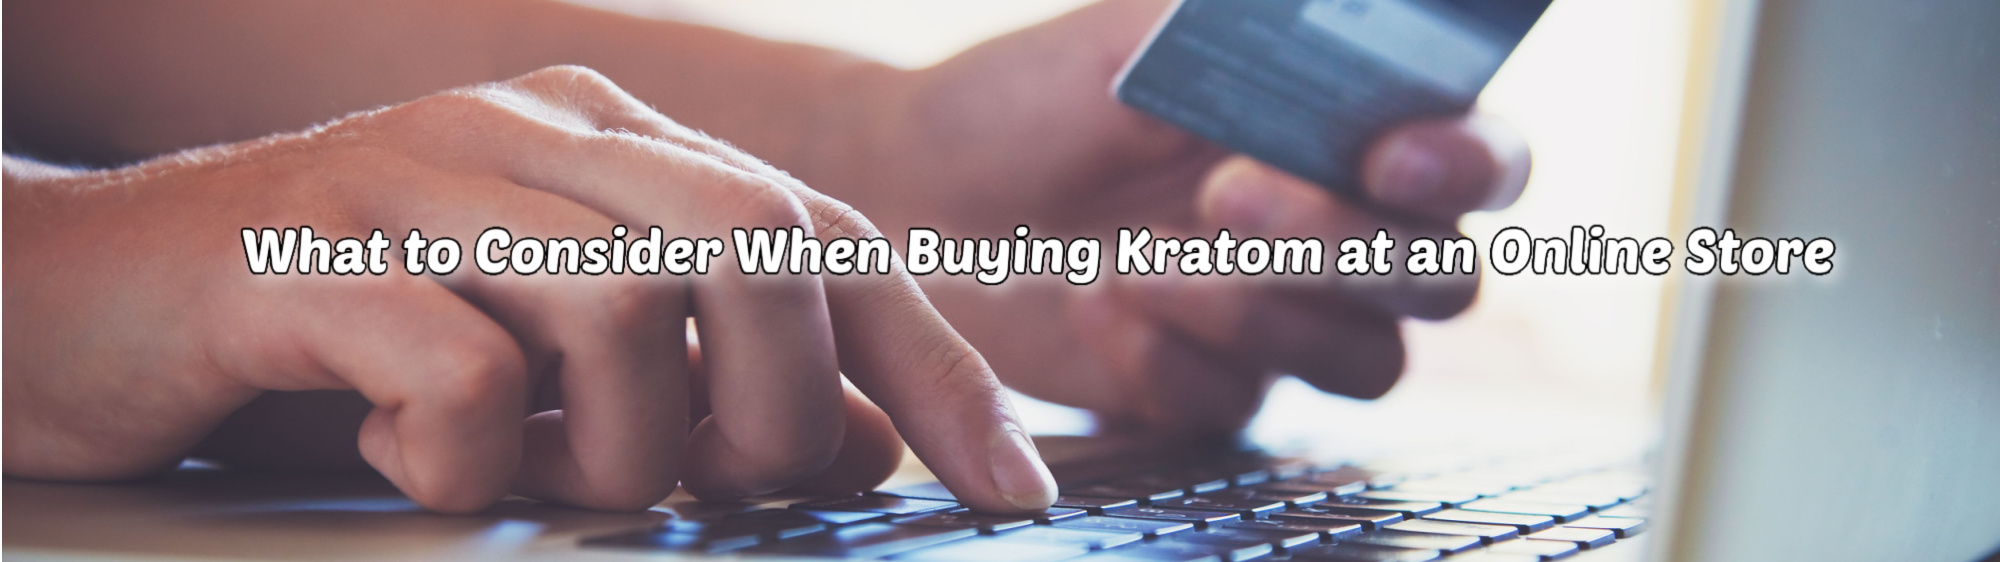 image of what to consider when buying kratom at an online store